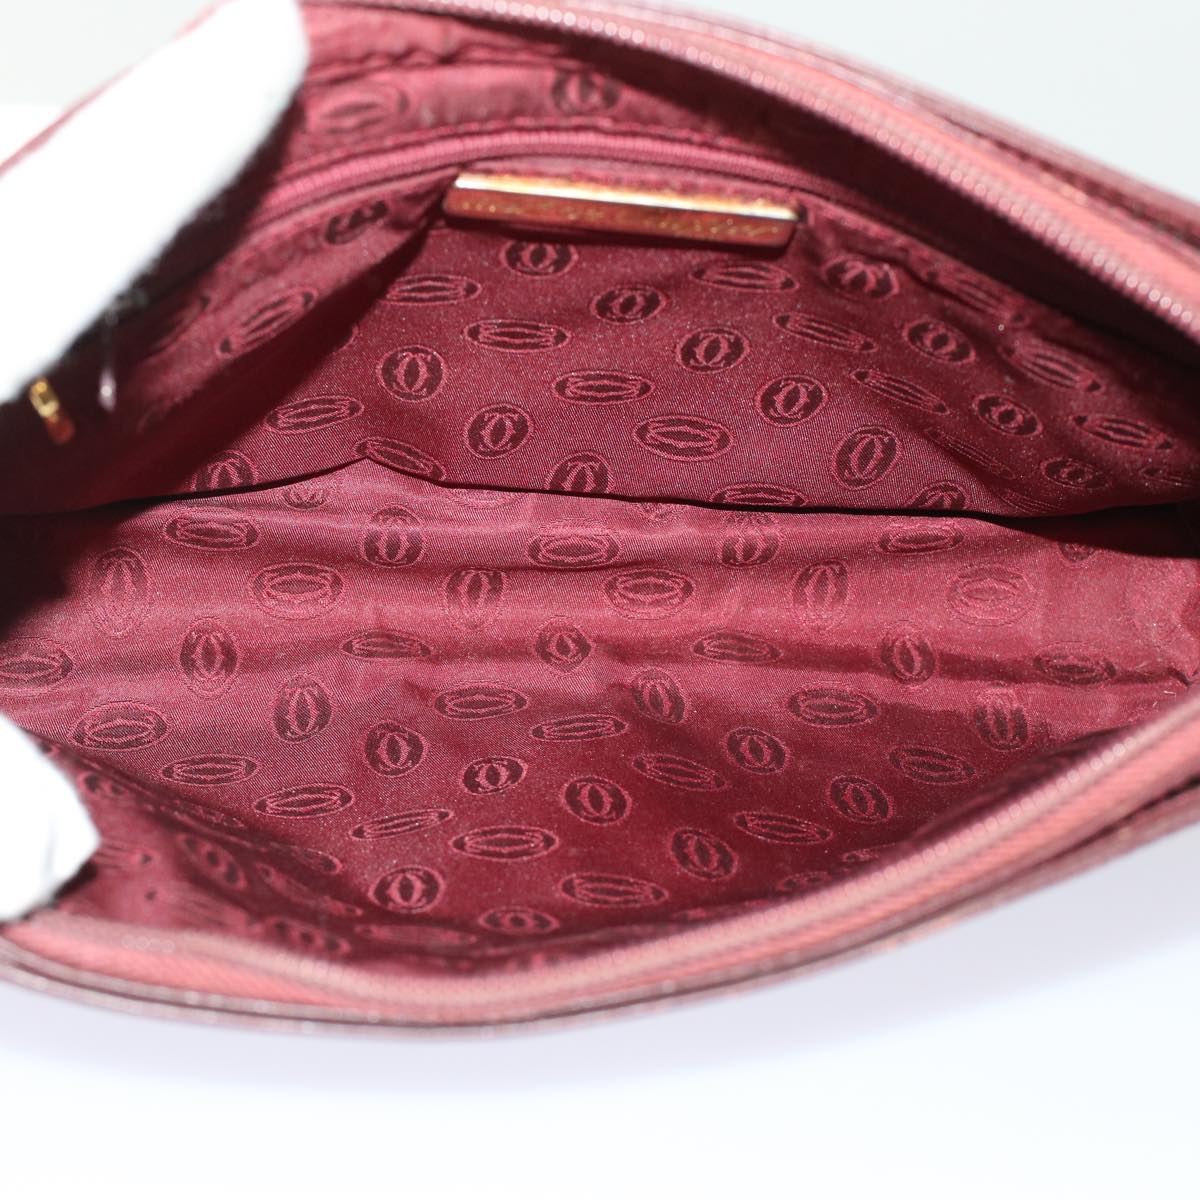 CELINE Cartier Macadam Canvas Clutch Bag Leather 3Set Wine Red Brown Auth bs6276